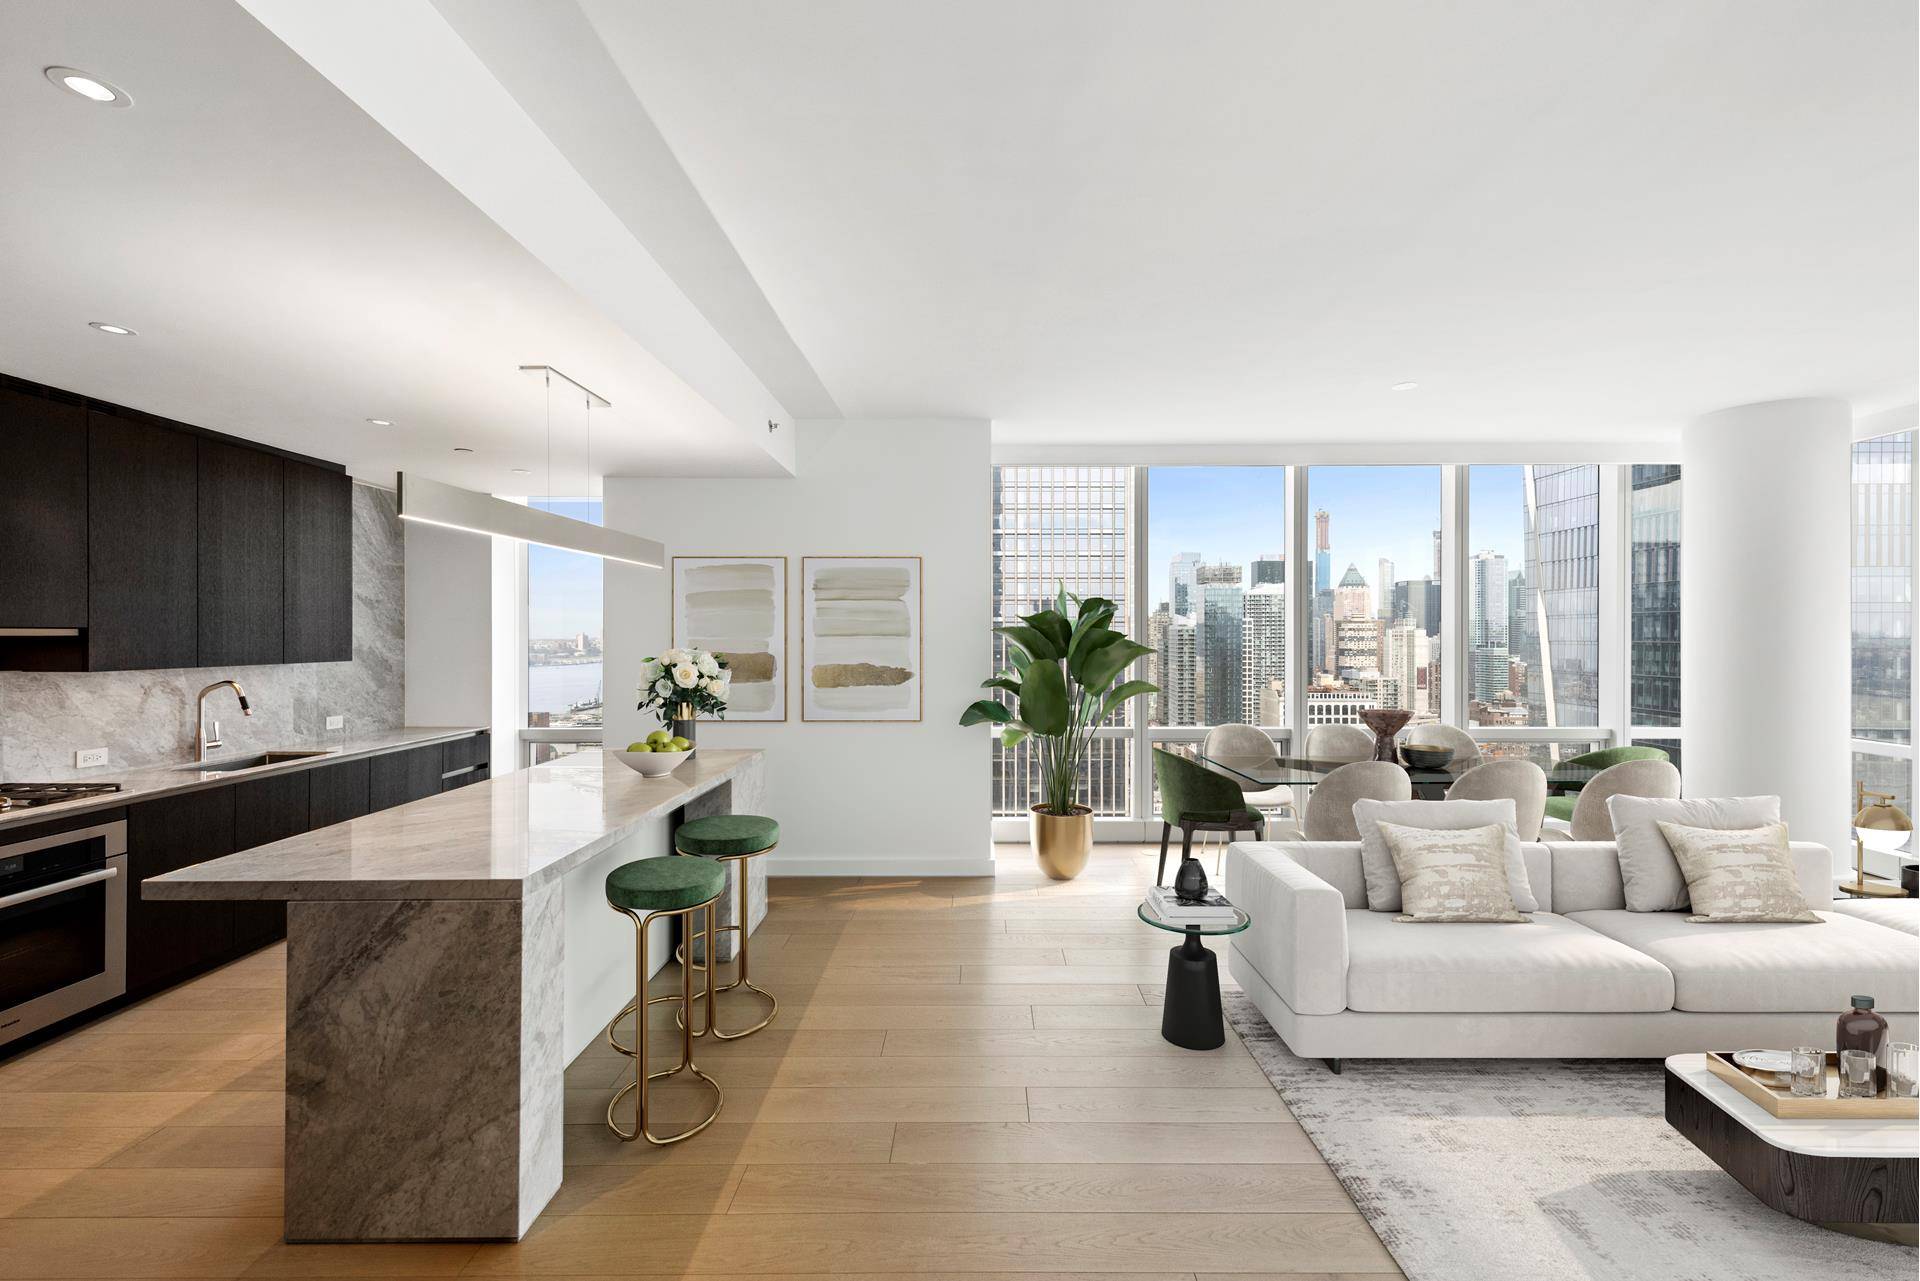 A corner rental nestled in the heart of the brand new Hudson Yards development, this 3 bedroom, 3 bathroom home is a portrait of contemporary city luxury.